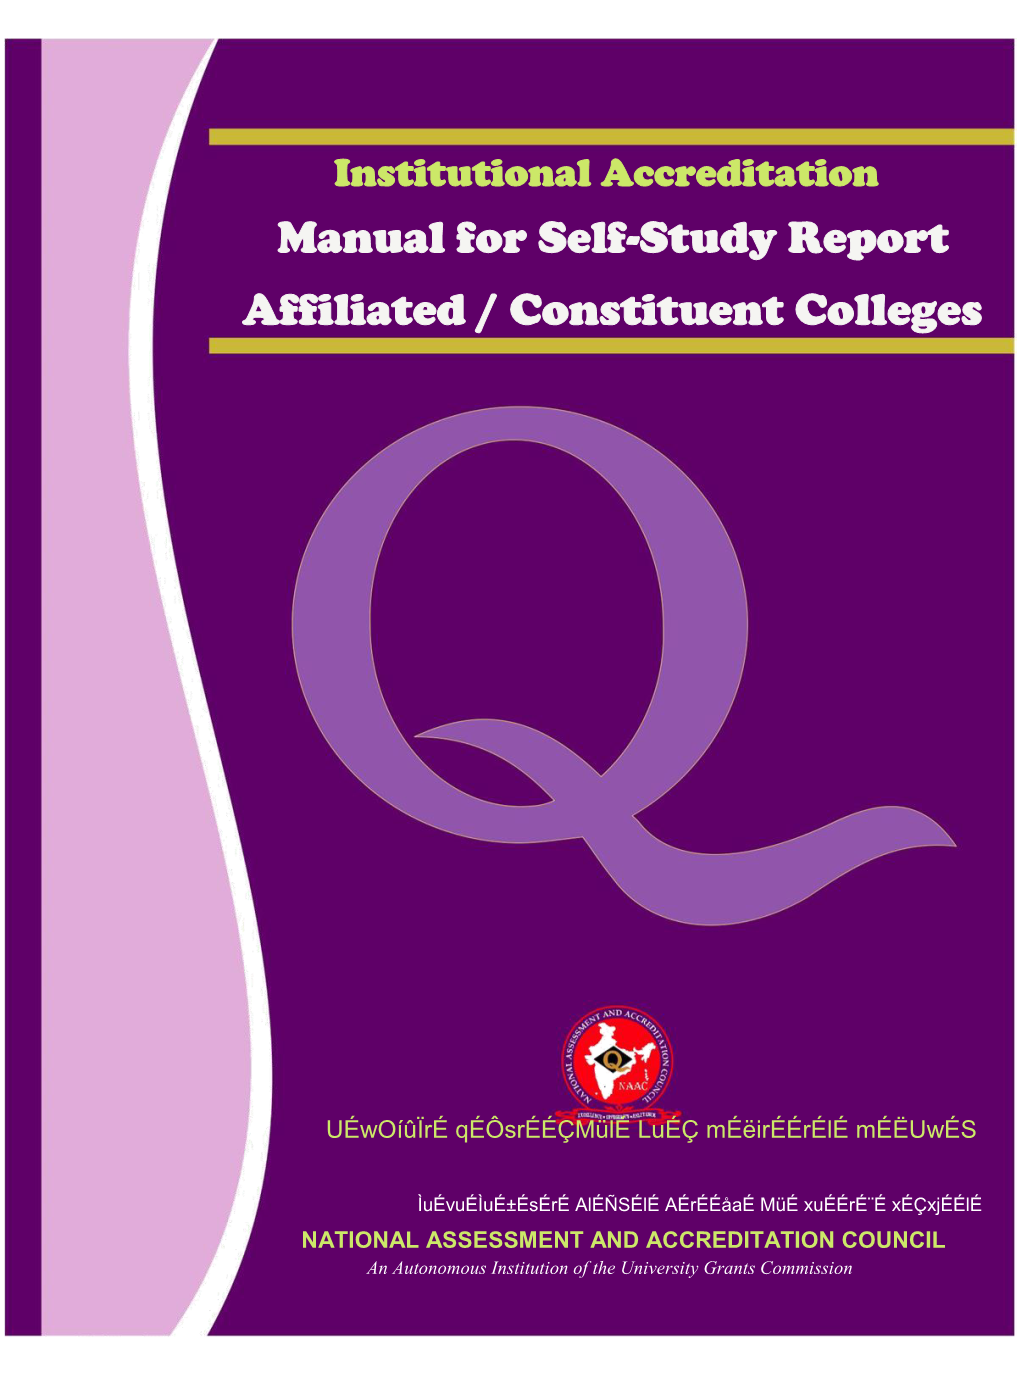 Manual for Self-Study Report Affiliated / Constituent Colleges